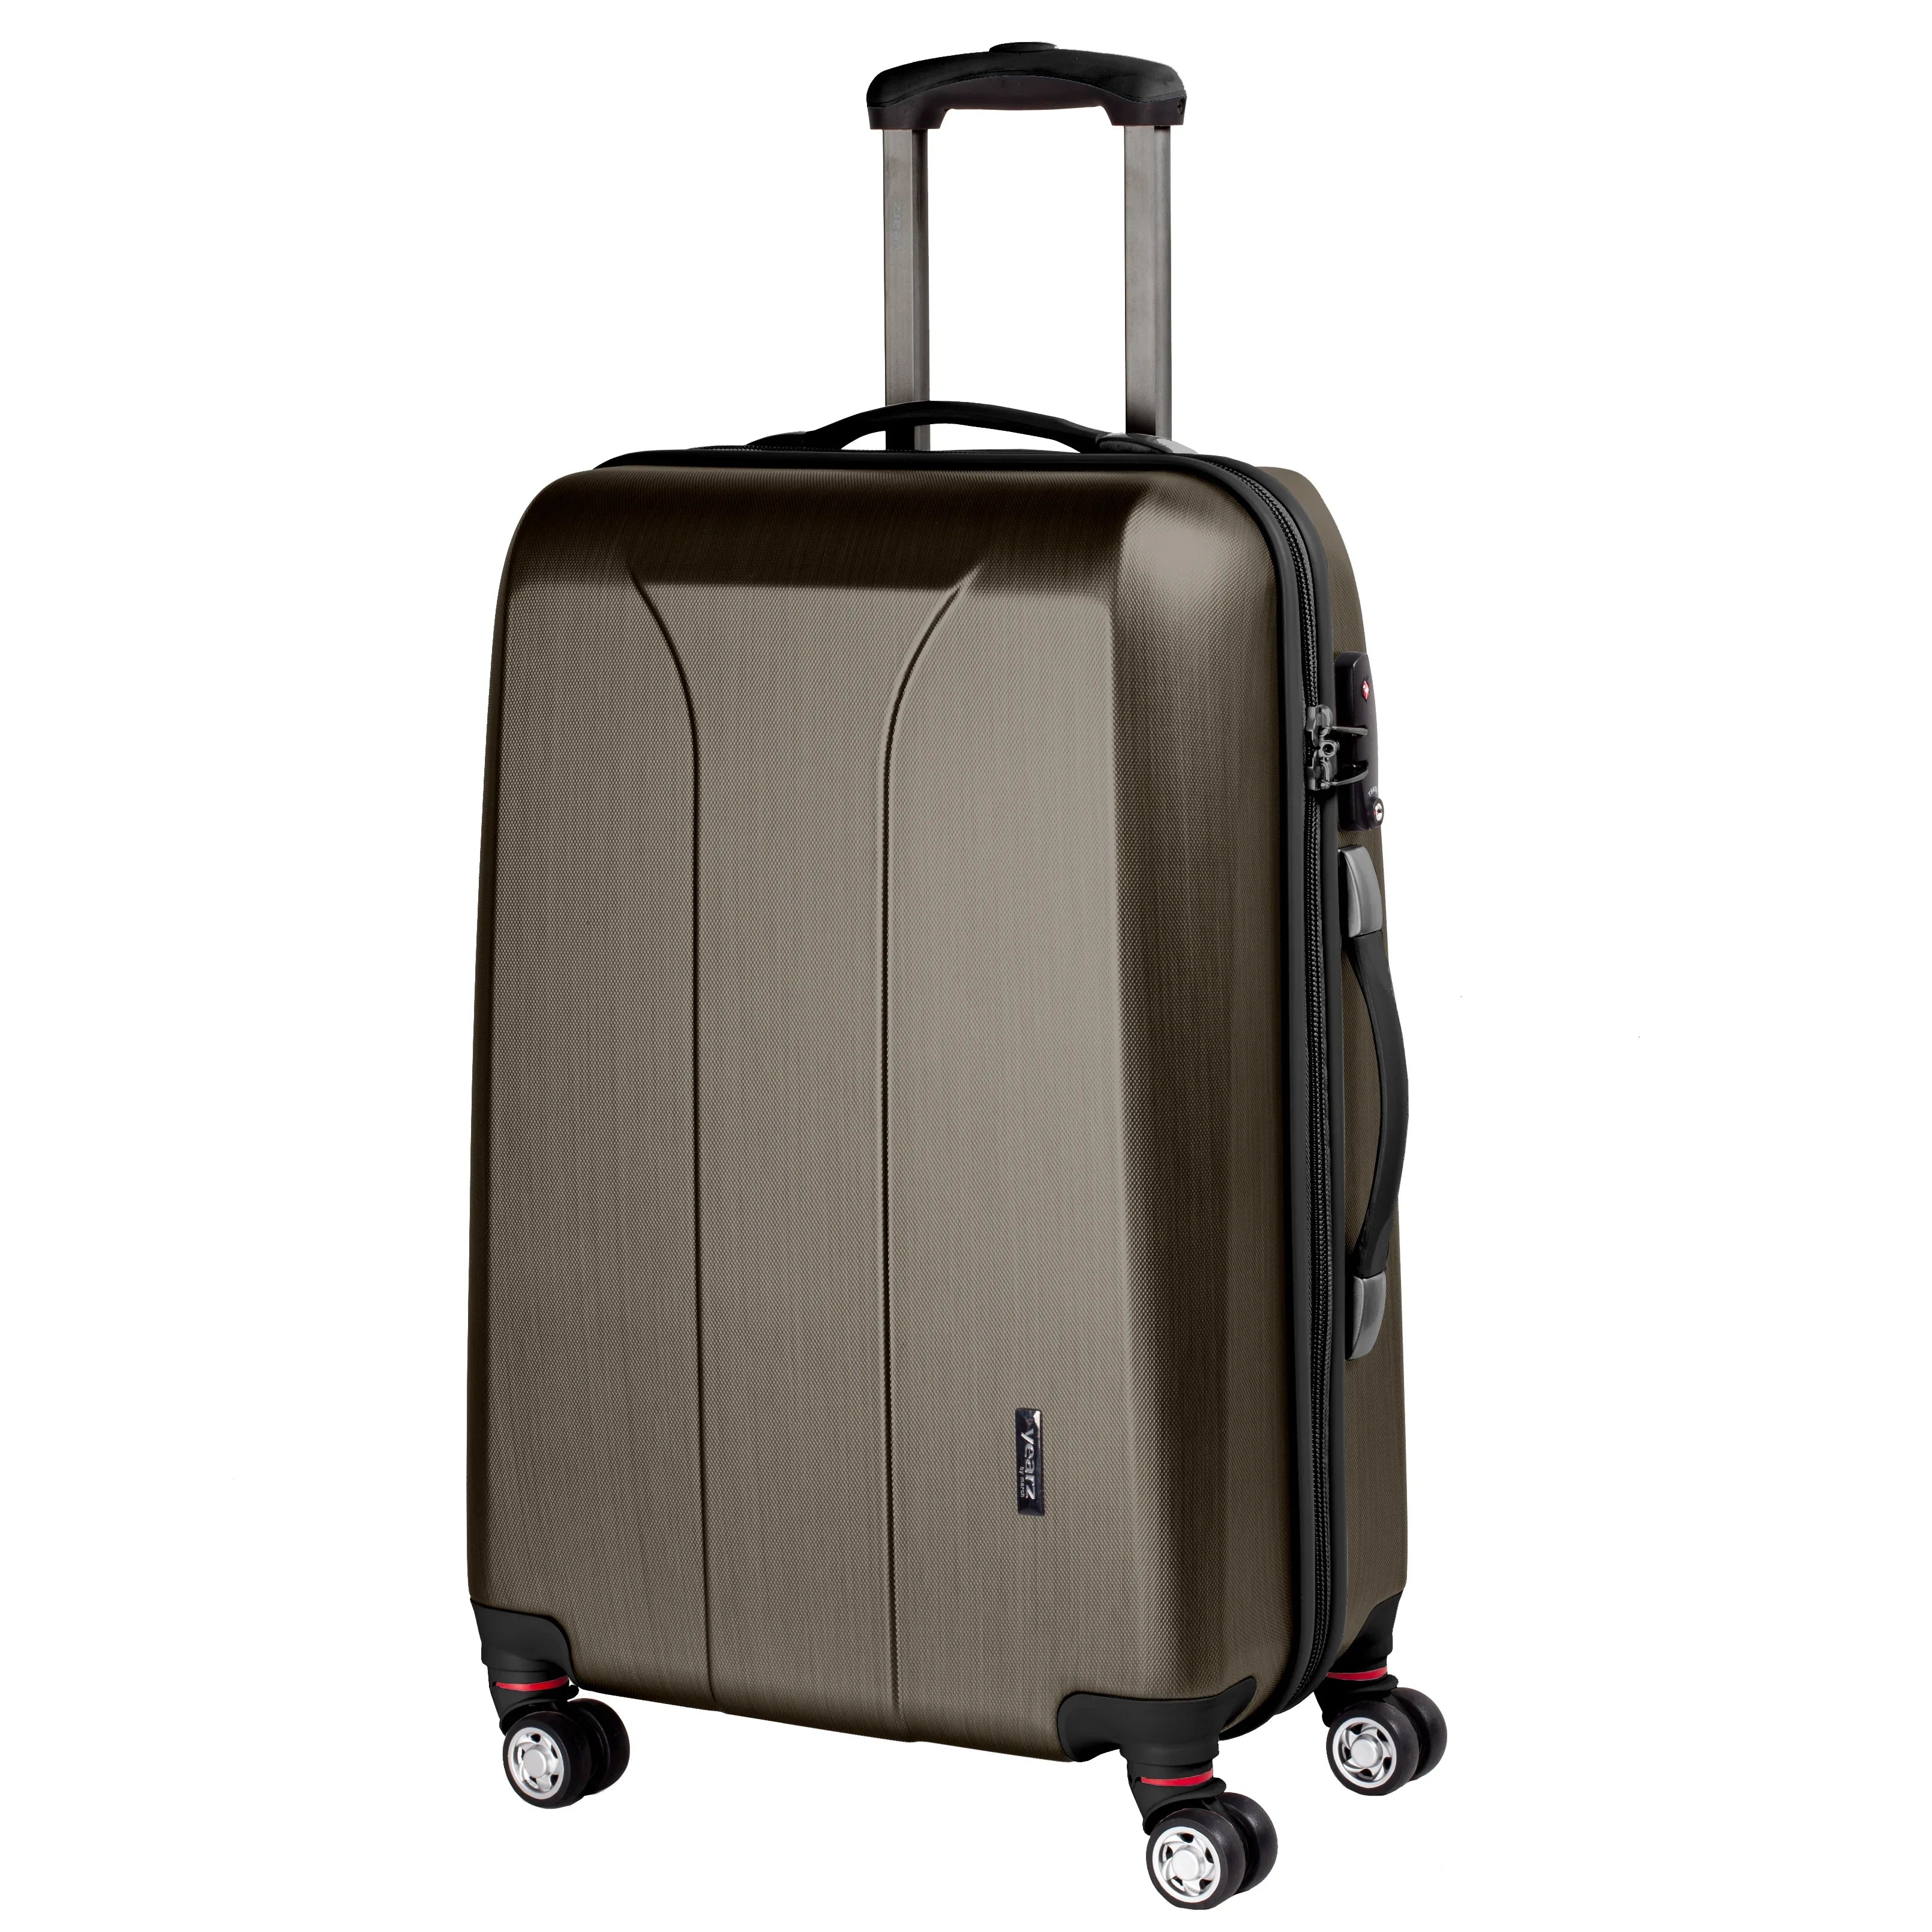 March 15 Trading New Carat 4-wheel trolley 65 cm - Bronze Brushed